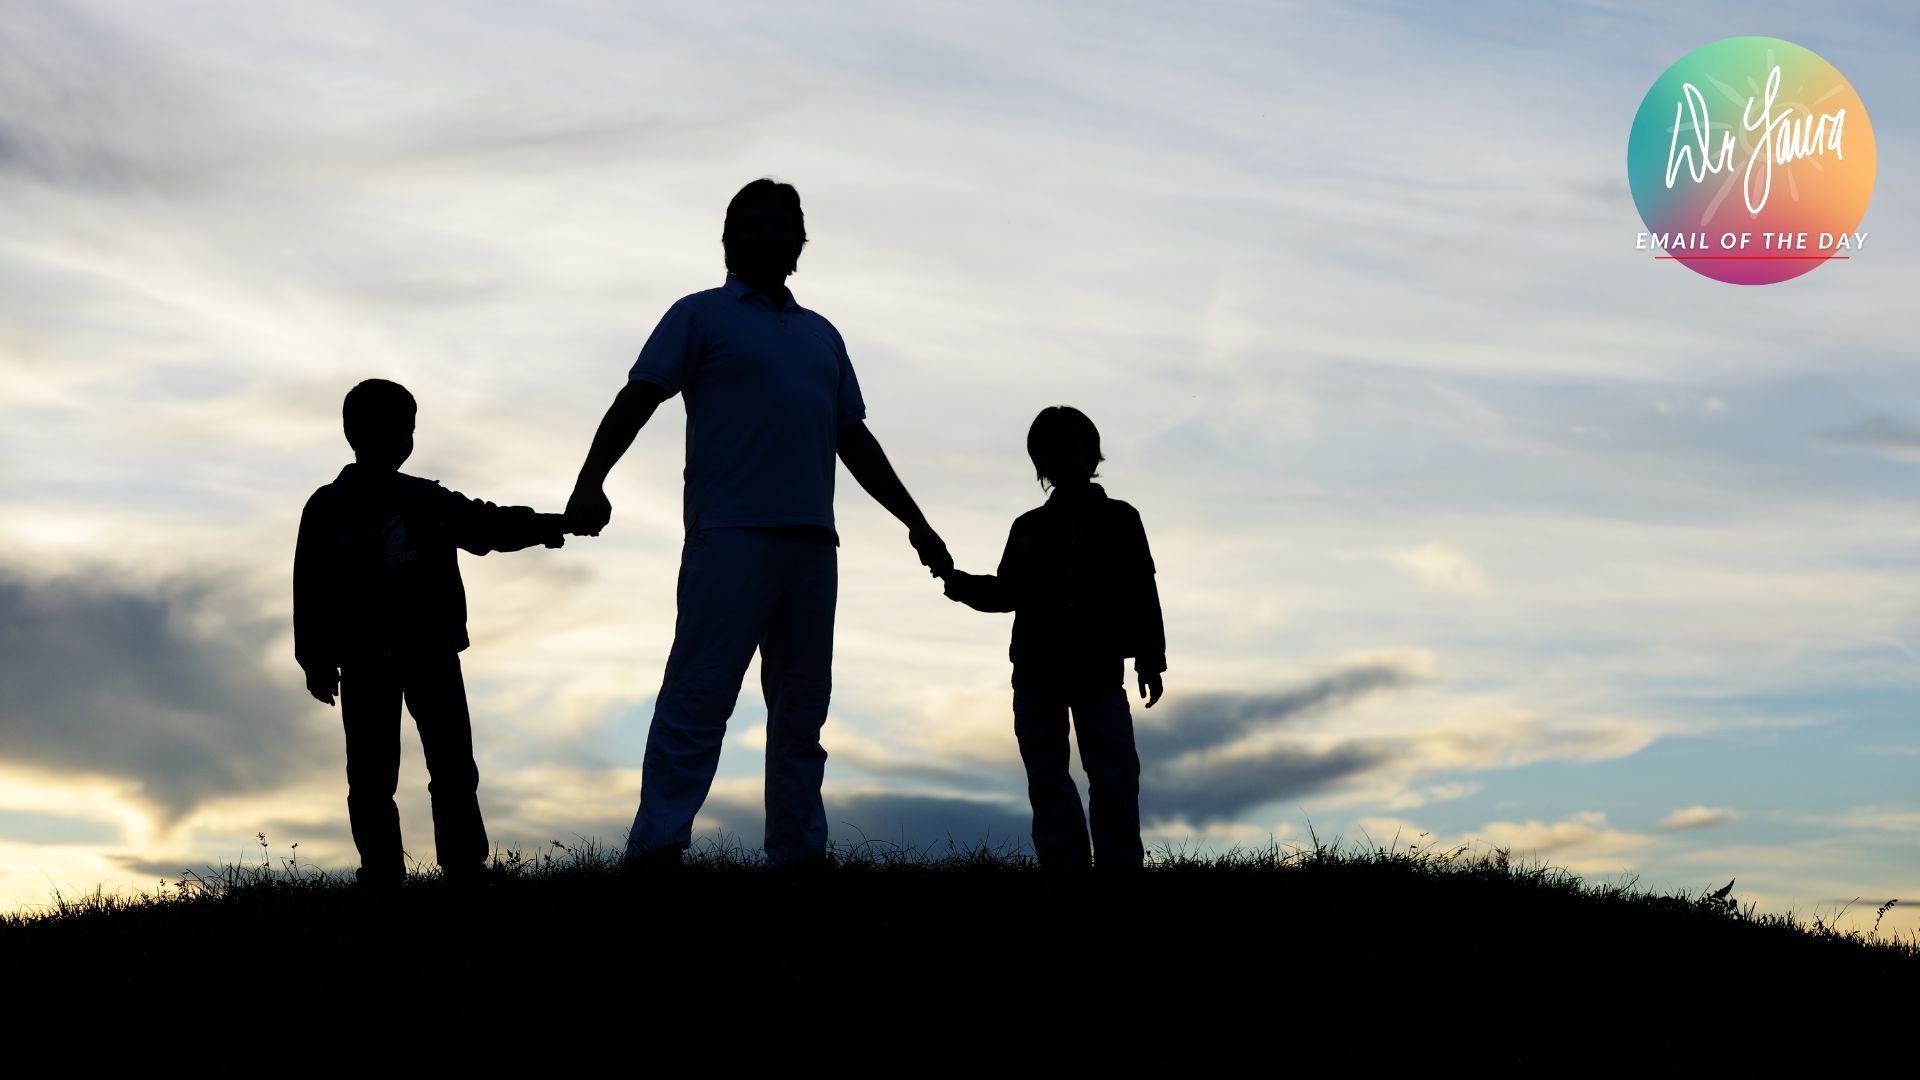 Silhouette of man holding onto the hands of two boys while standing atop a grassy field